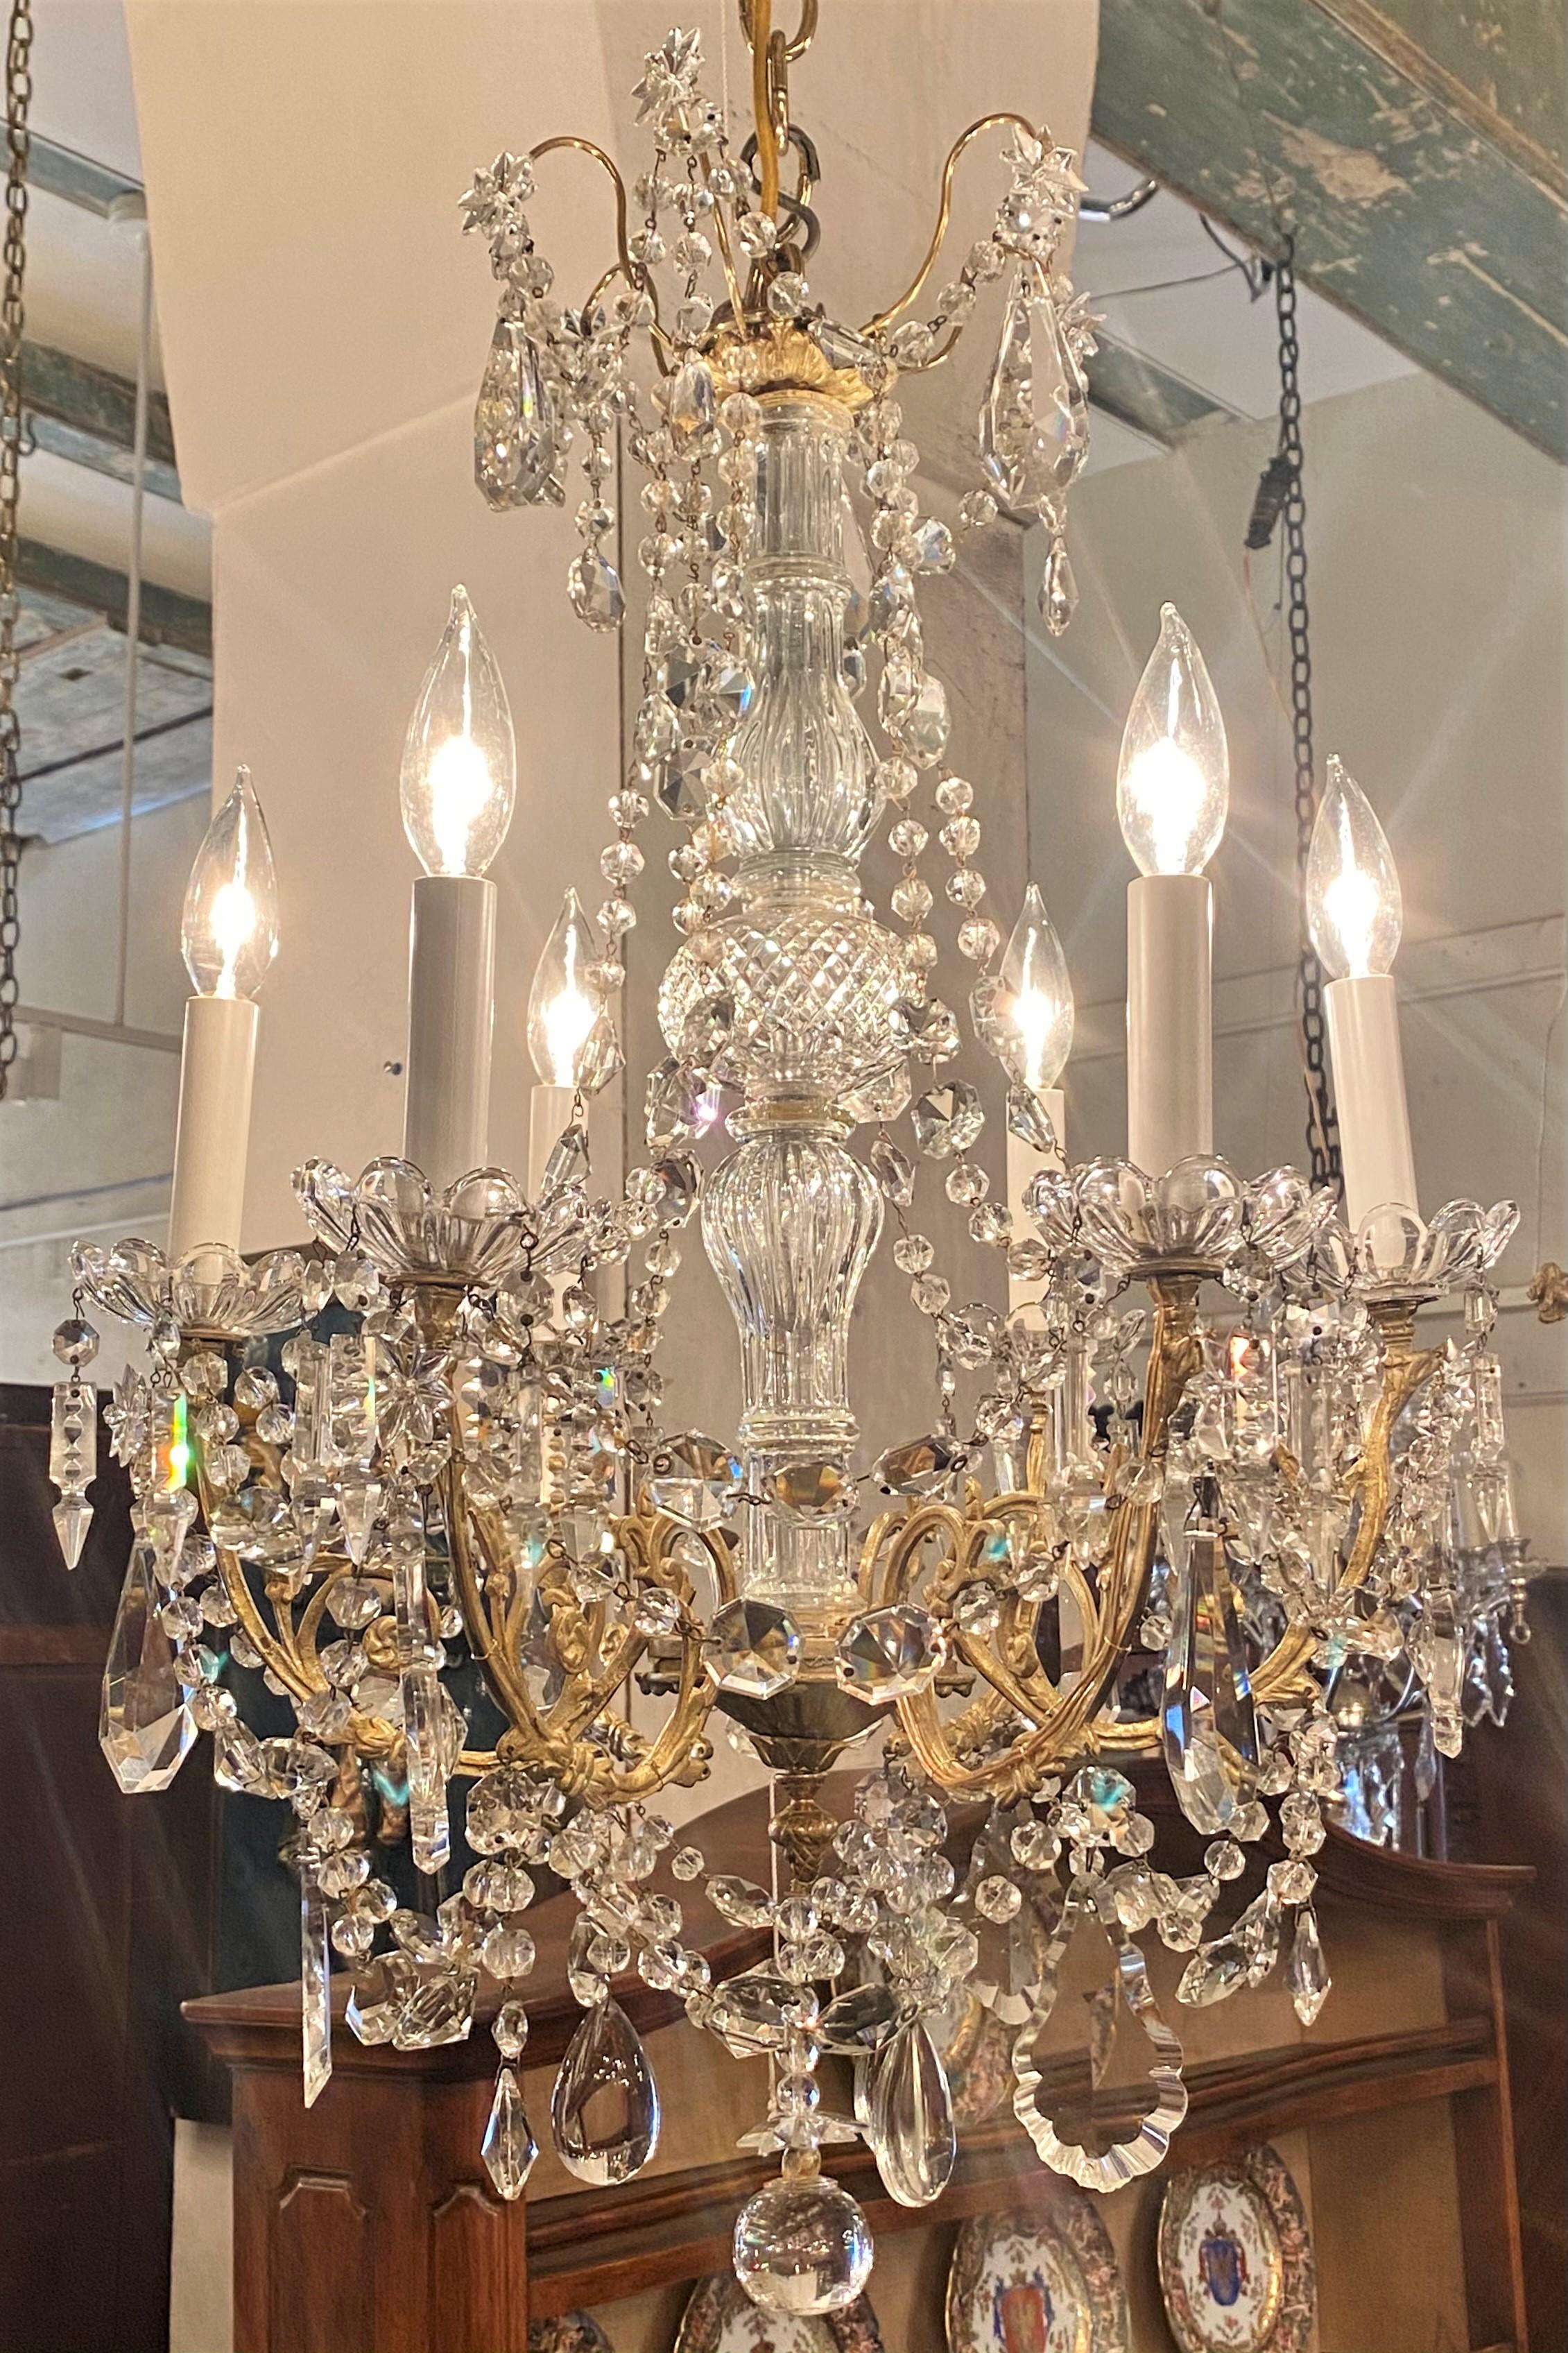 Antique French gold bronze and cut crystal 6 - light chandelier, circa 1890.
Beautiful crystal stem with lovely draped beading and cut crystals.
Shipped with matching canopy and 3ft of chain (more chain available if needed).